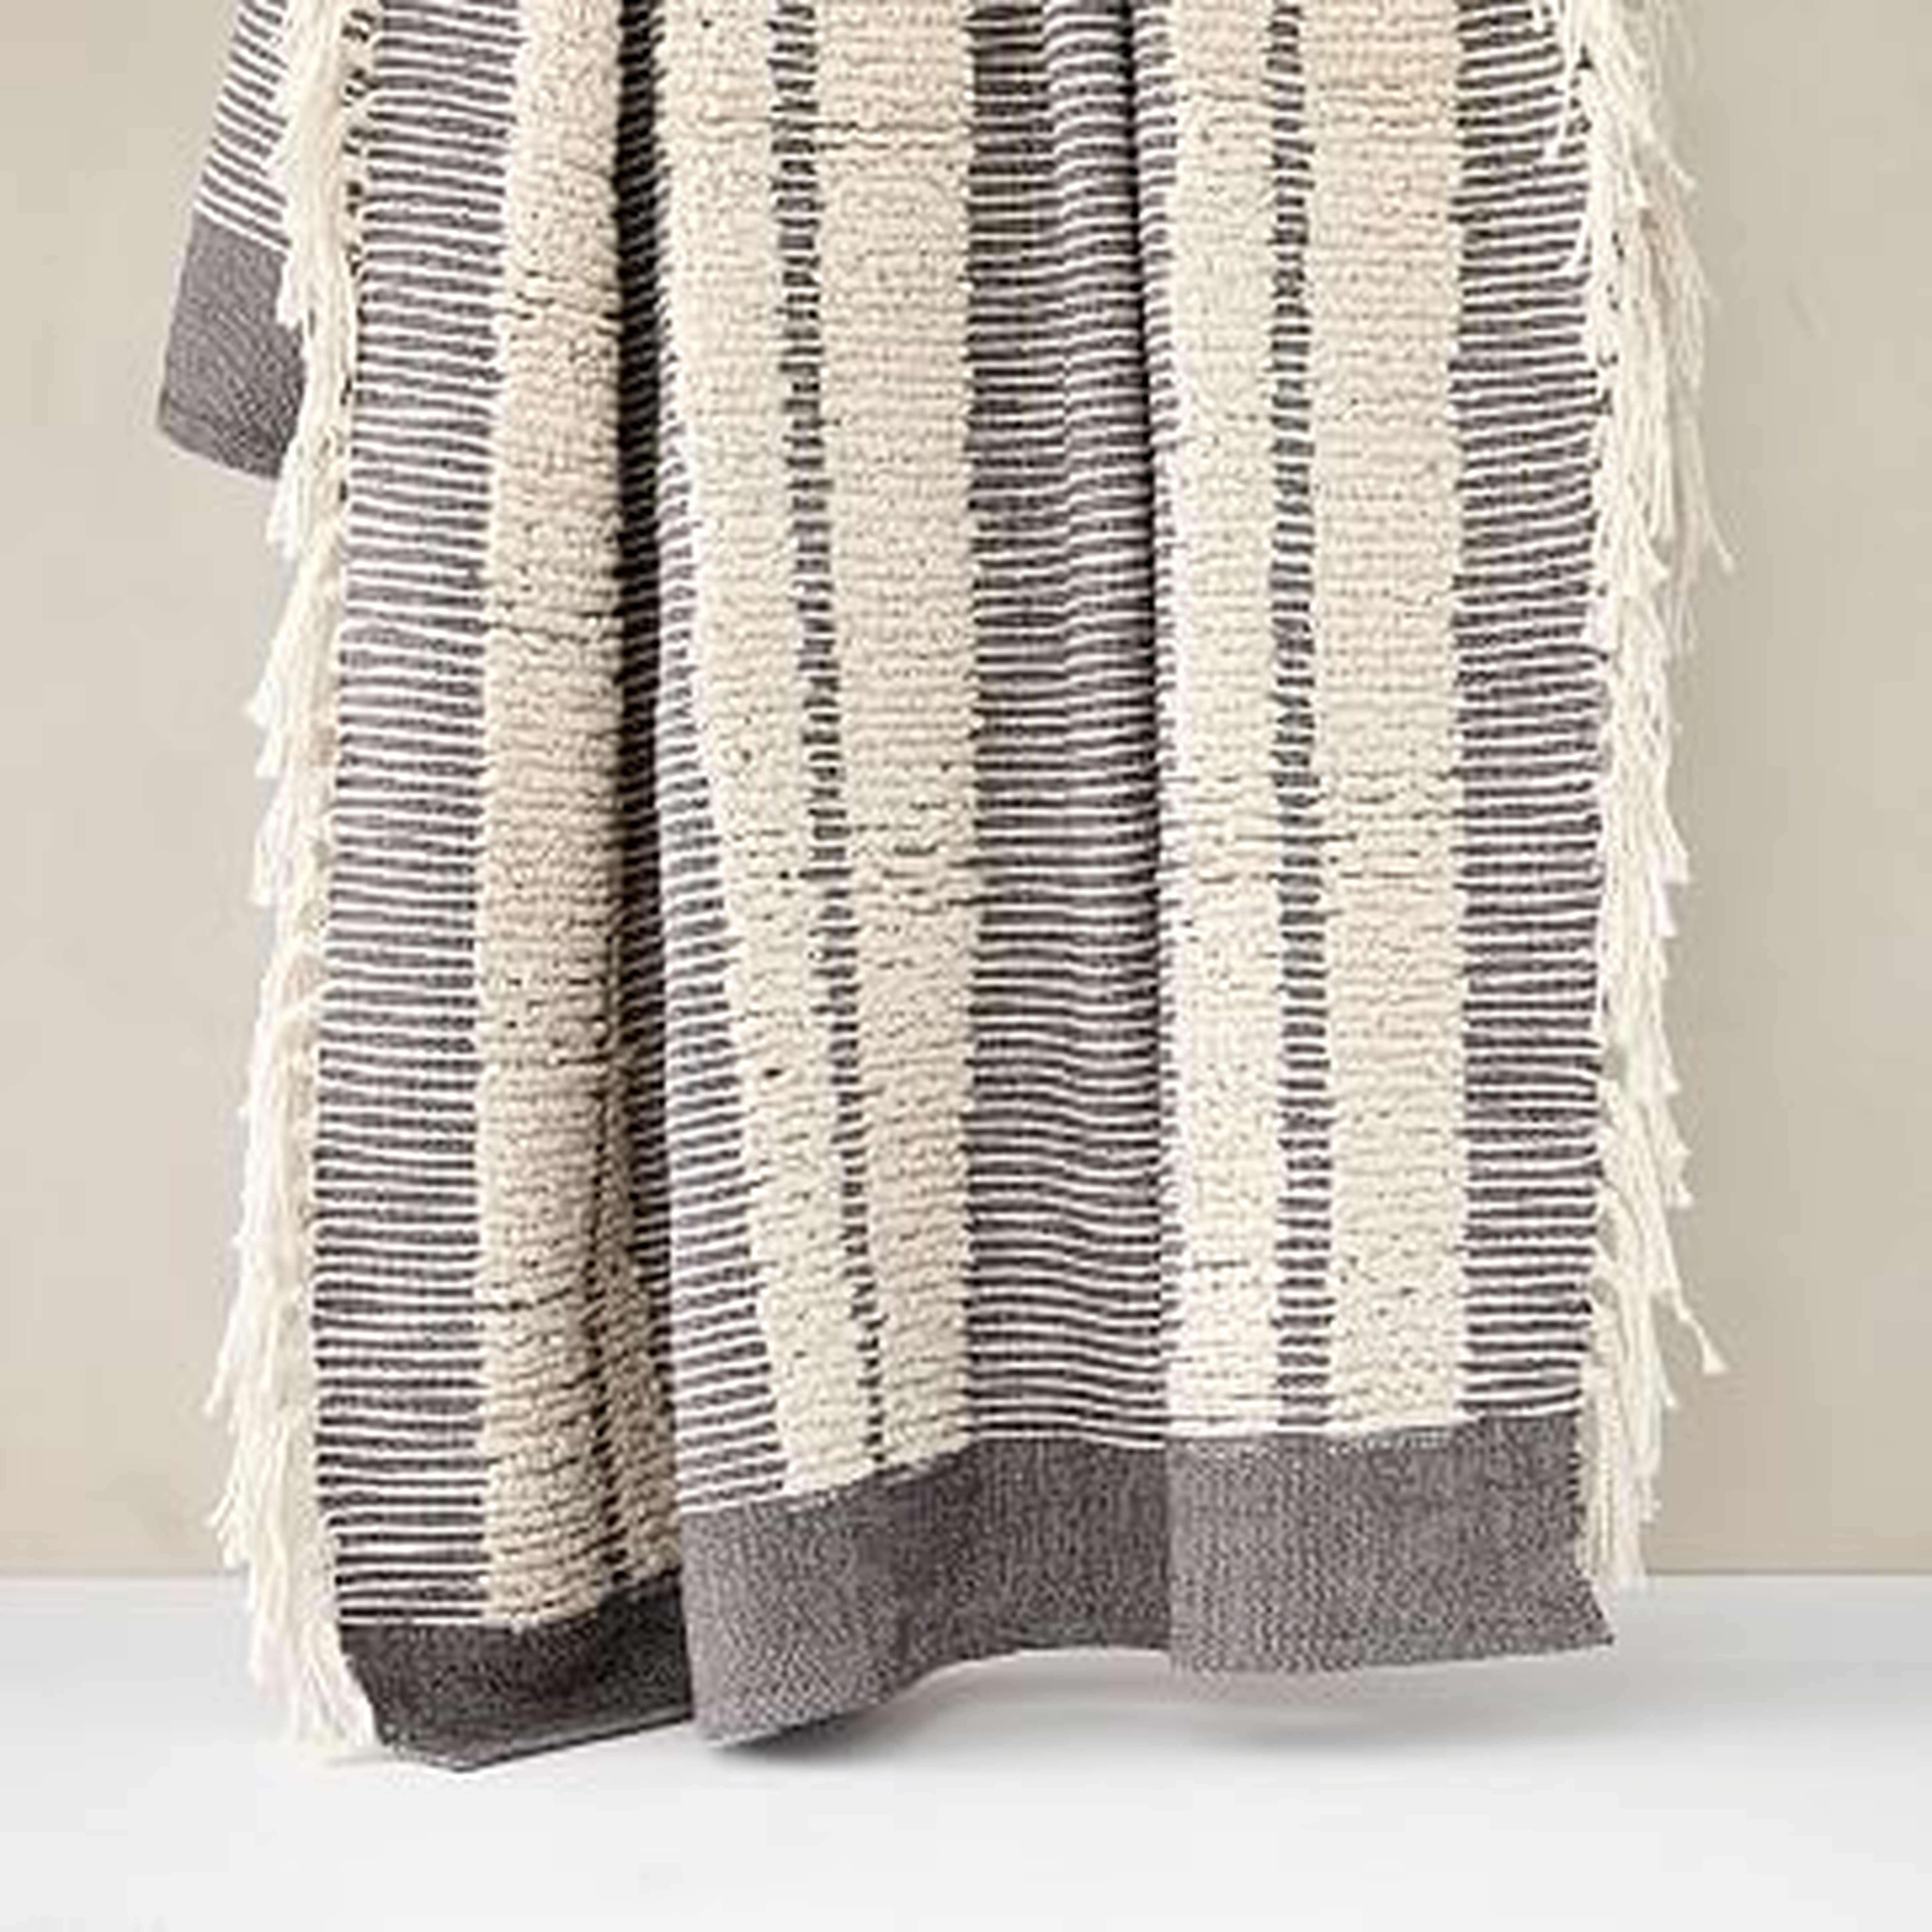 Tufted Lines Throw, 50"x60", Pewter - West Elm